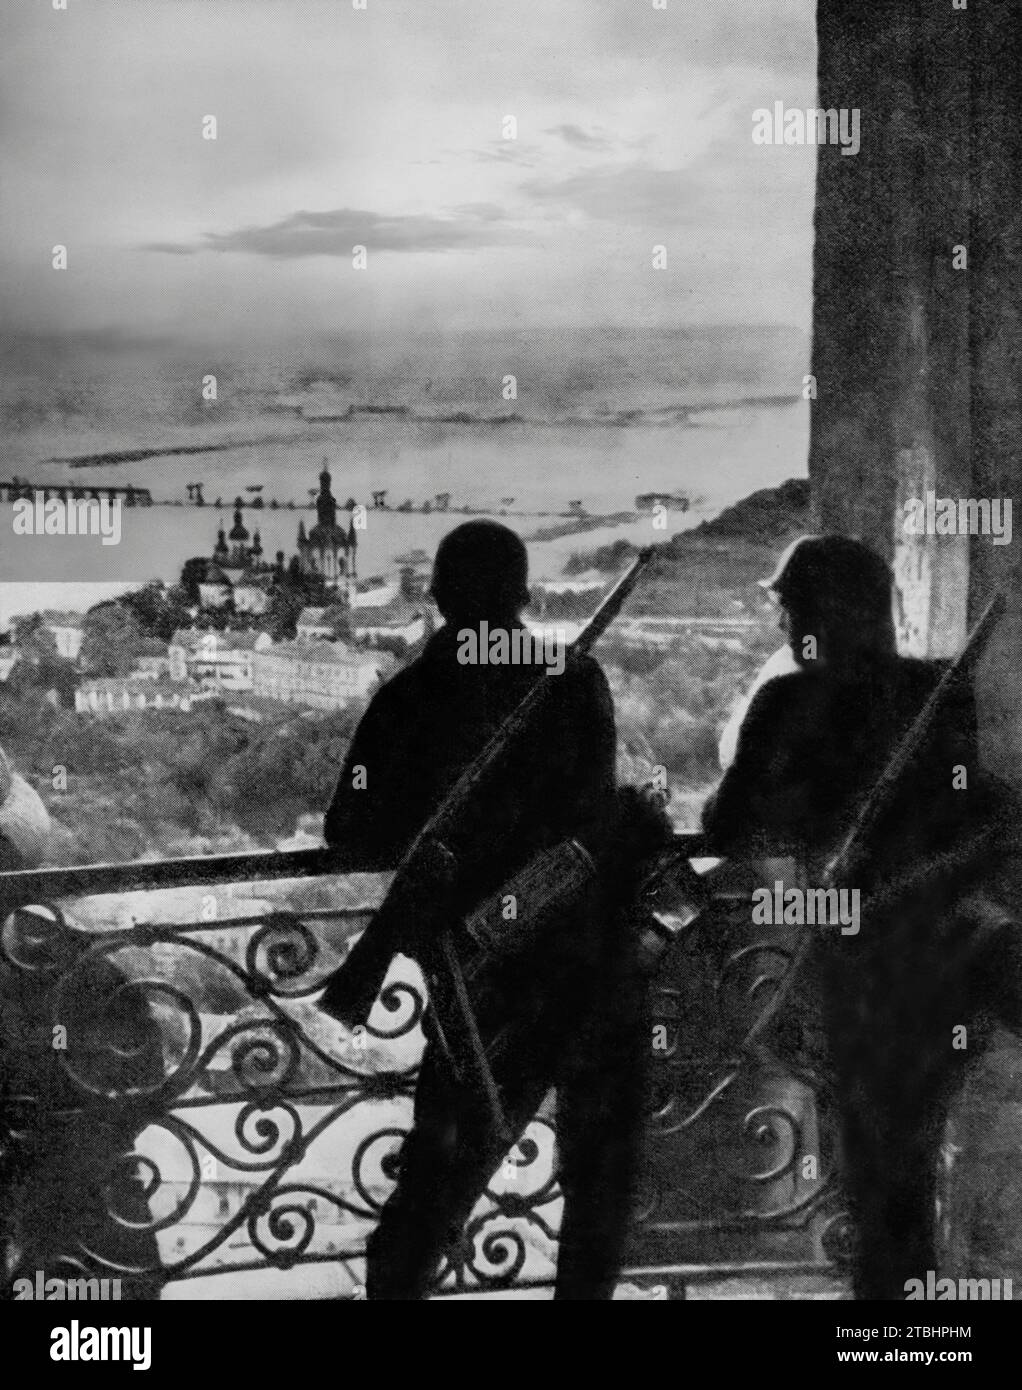 Two soldiers of the Wermacht look out from the citadel across the Ukrainian capital of Kiev following it's capture during the Second World War German invasion of Russia in September 1941. Stock Photo